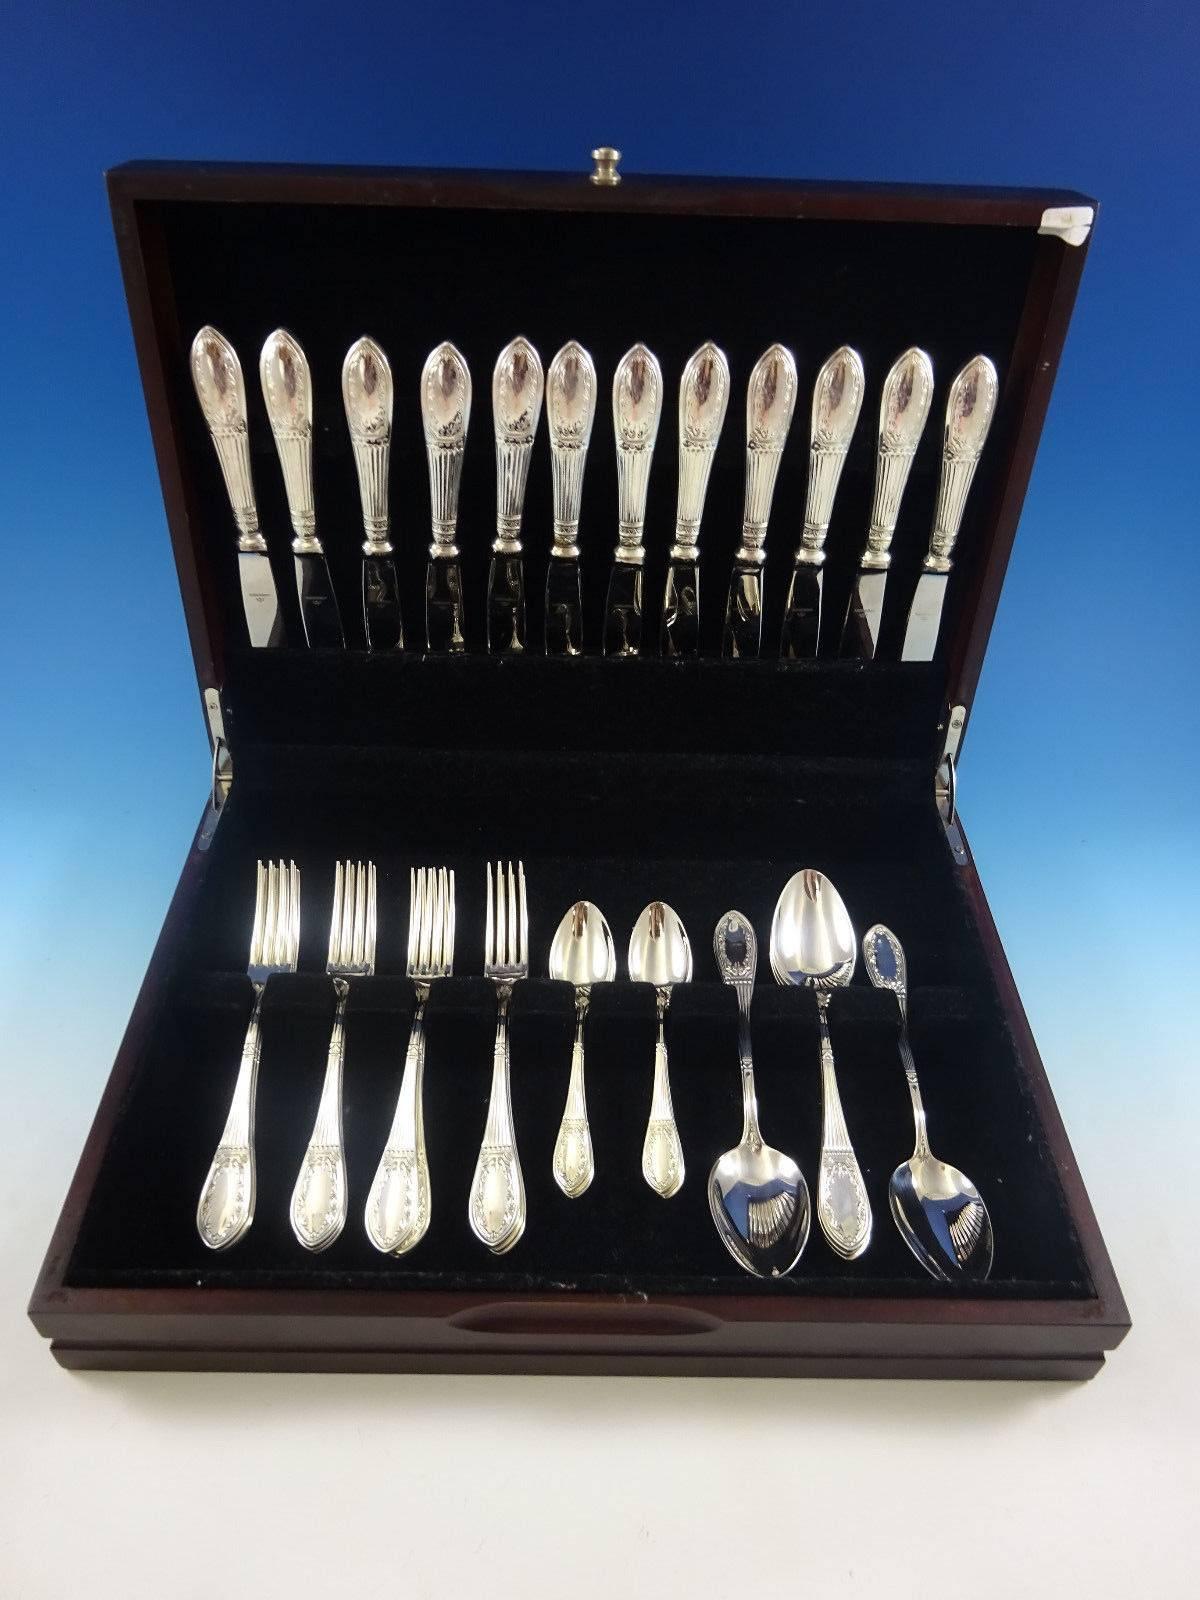 Good looking 925 sterling silver flatware set by Modison of India- 36 pieces. This pattern features an attractive modern-style wreath design at the tip, beading, and vertical lines. This set includes:
 
12 knives, 8 1/8